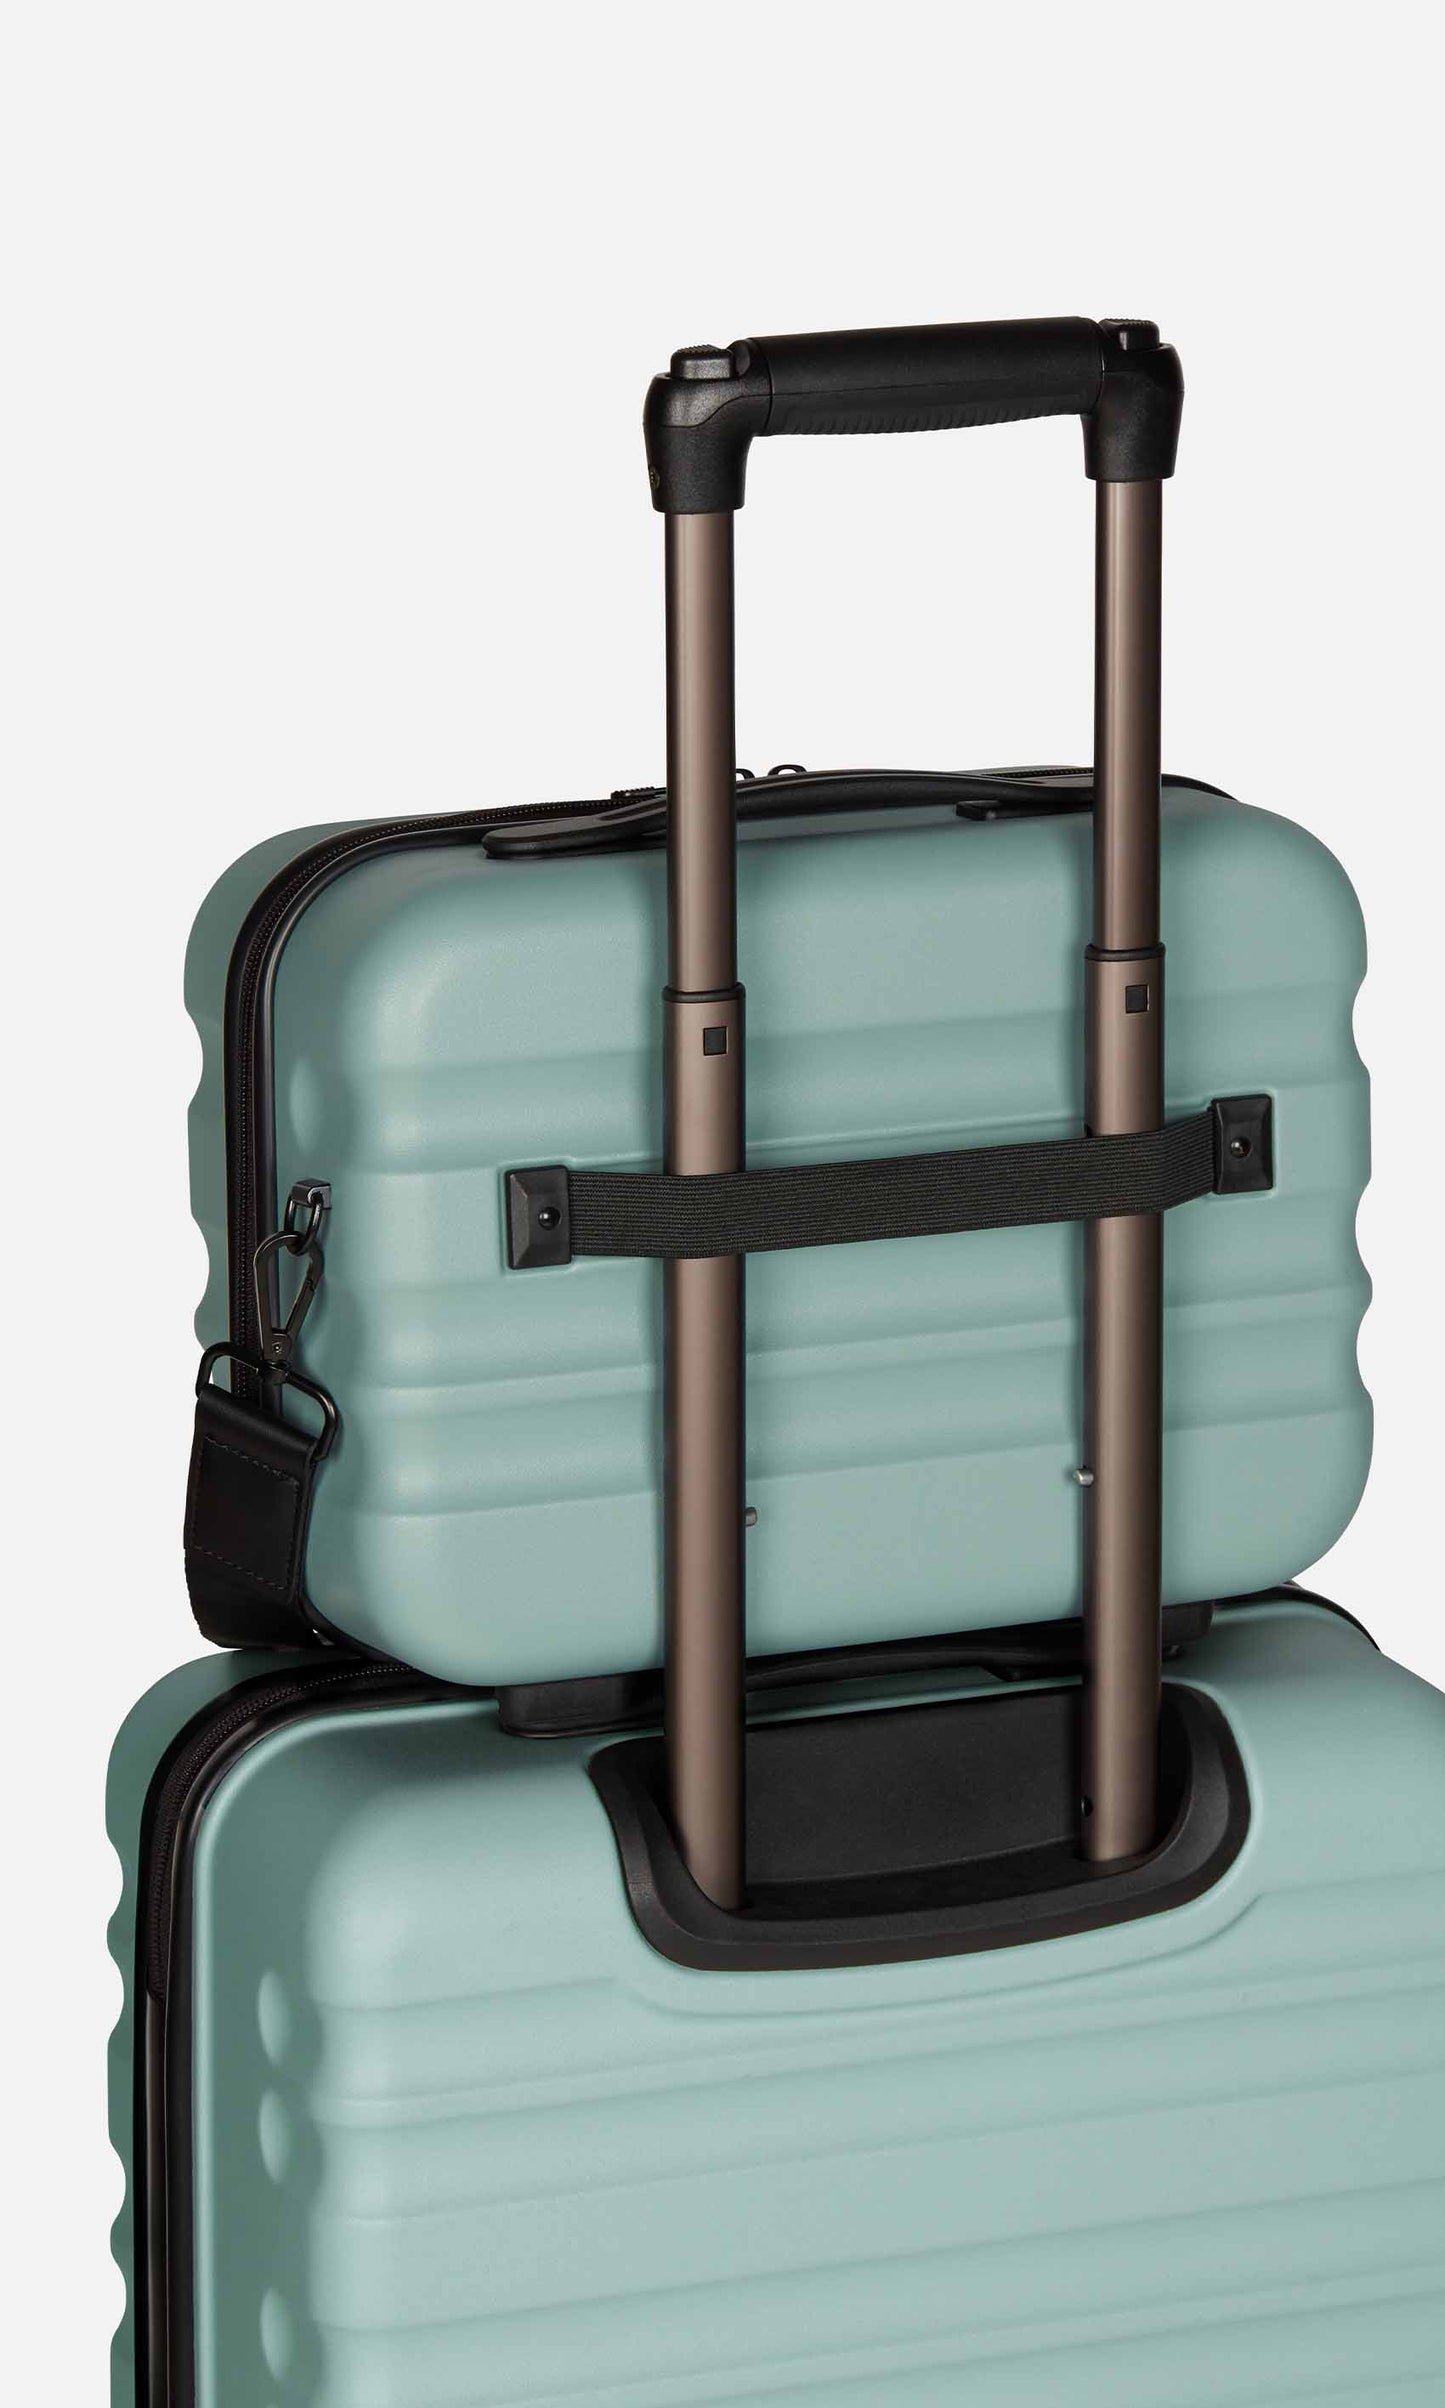 Antler Luggage -  Clifton vanity case in mineral - Hard Suitcases Clifton Vanity Case Mineral (Blue) | Travel Accessories & Gifts | Antler 